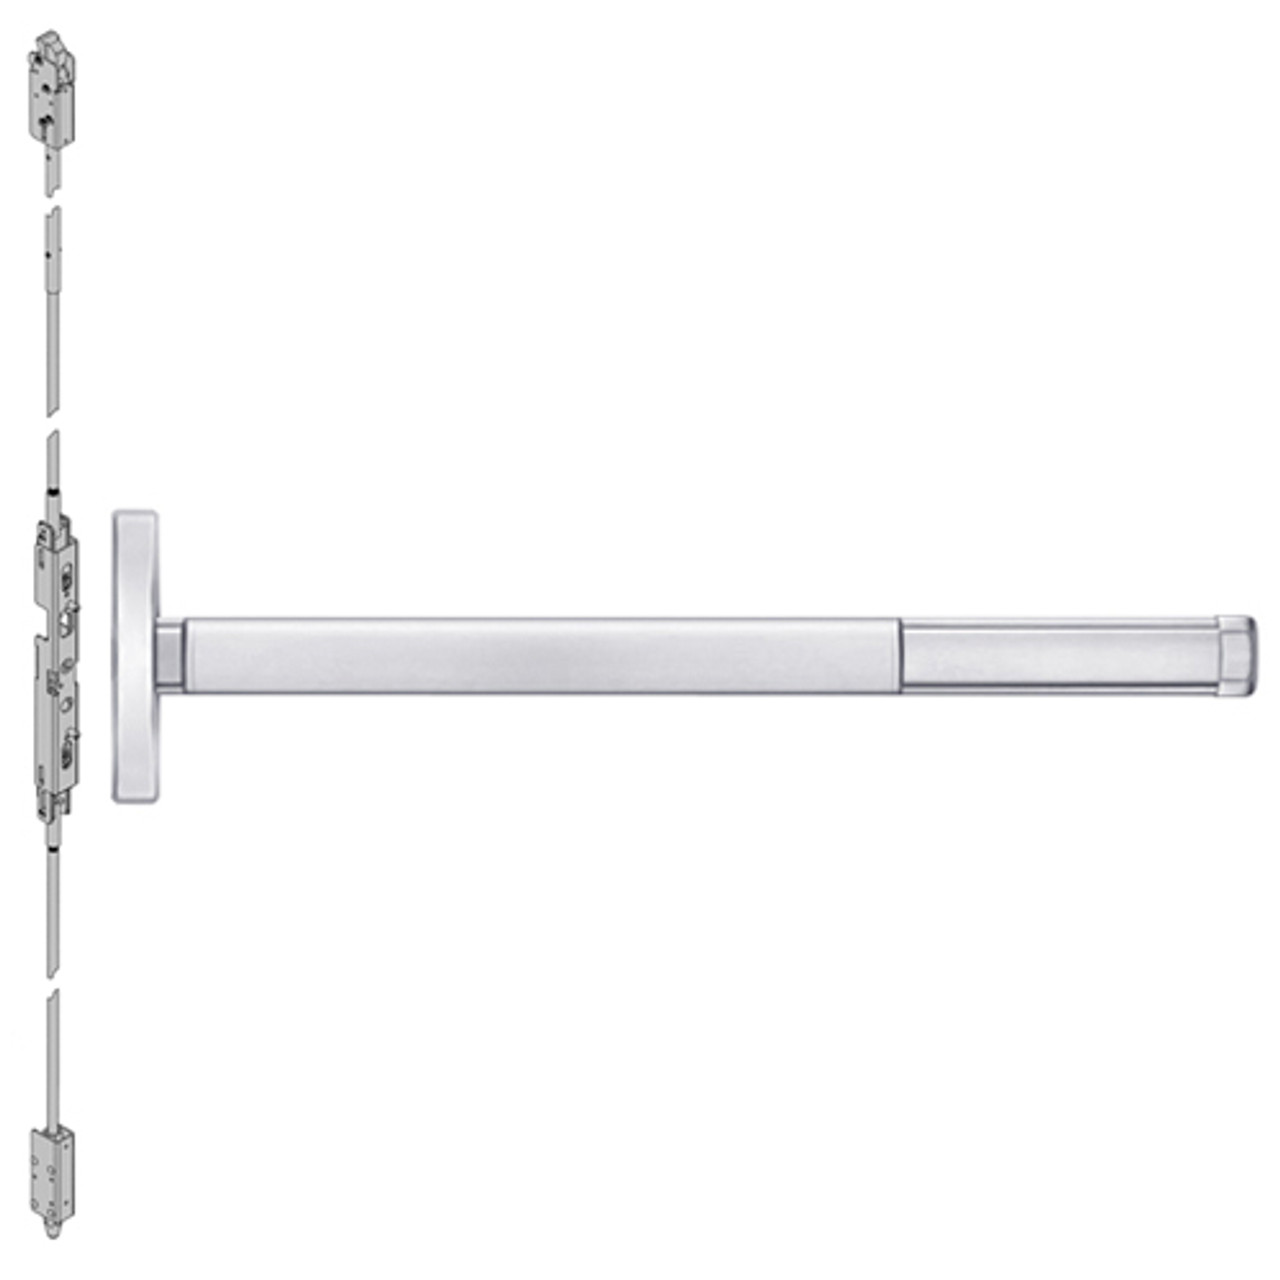 MLRFL2602-625-48 PHI 2600 Series Fire Rated Concealed Vertical Rod Exit Device with Motorized Latch Retraction Prepped for Dummy Trim in Bright Chrome Finish